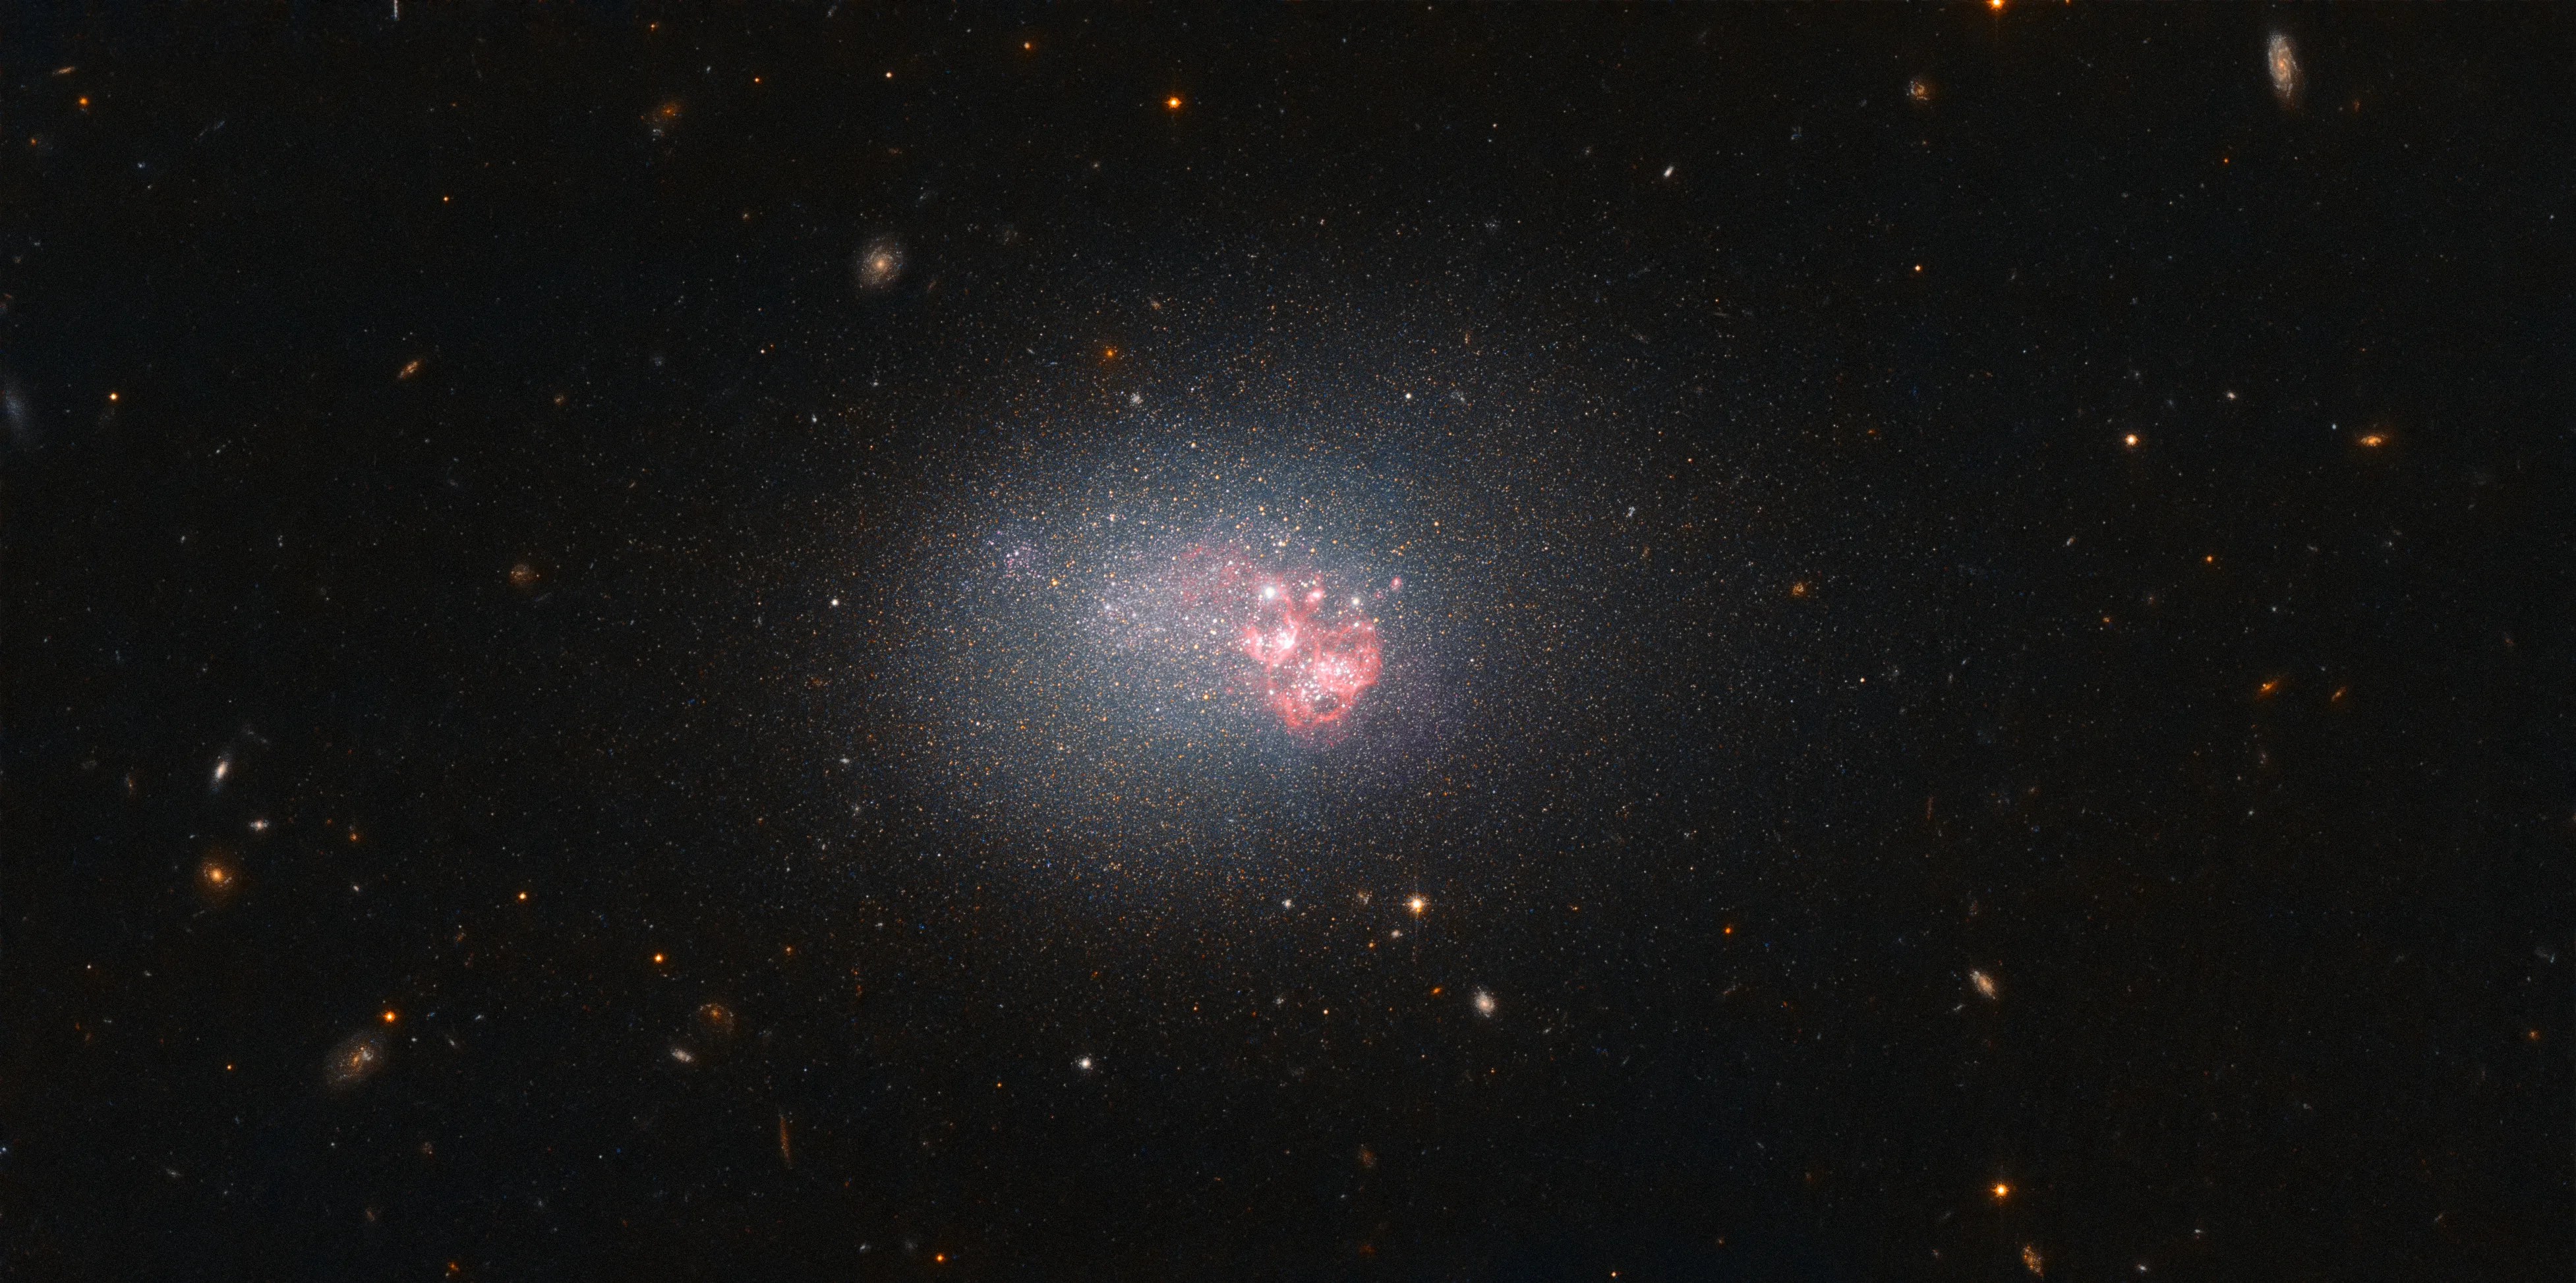 Diffuse bluish galaxy with a bright pink region off center